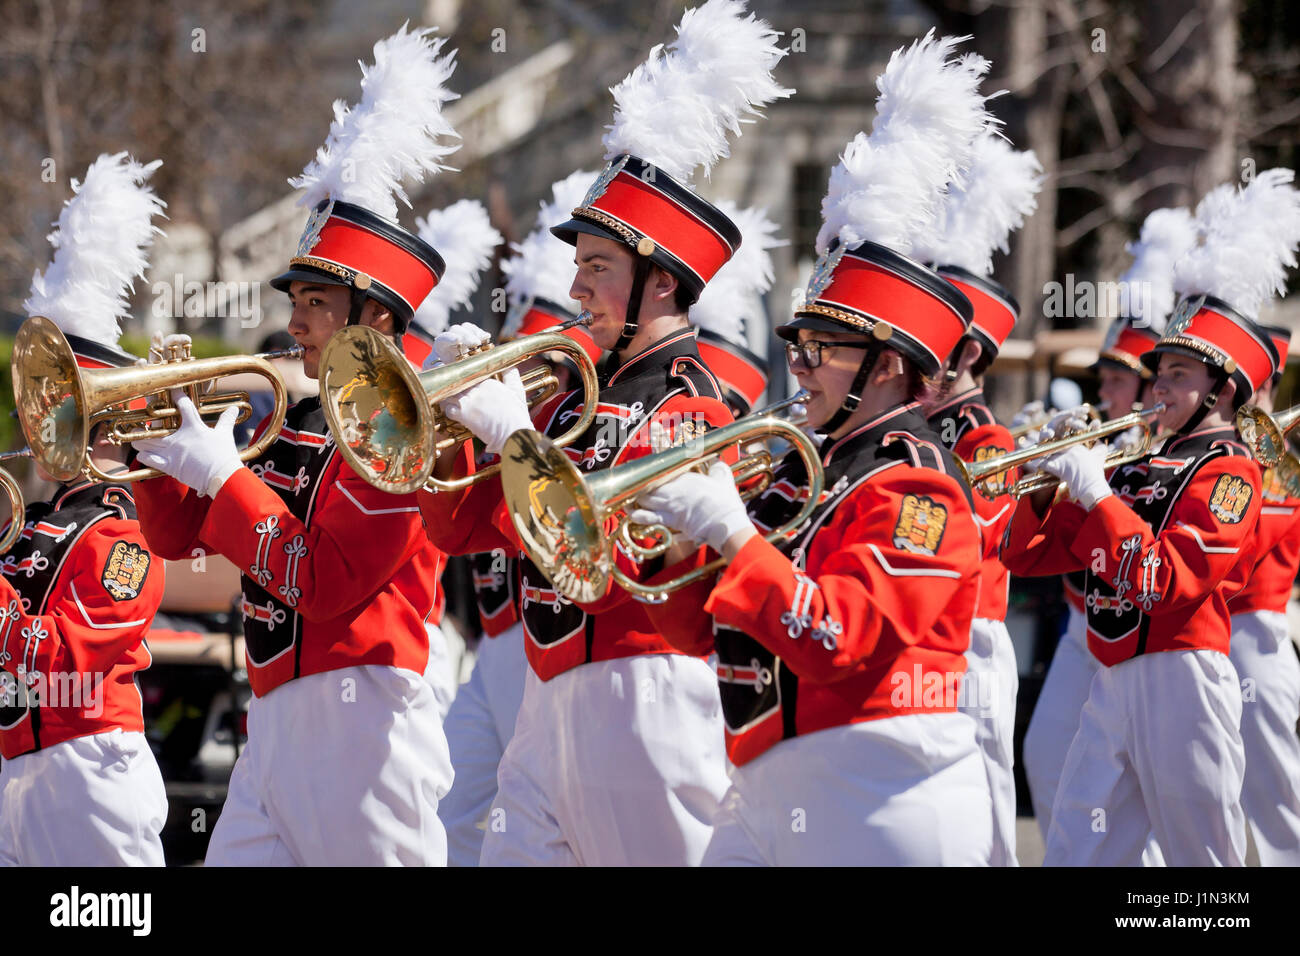 High school marching band cornet players during street parade - USA Stock Photo